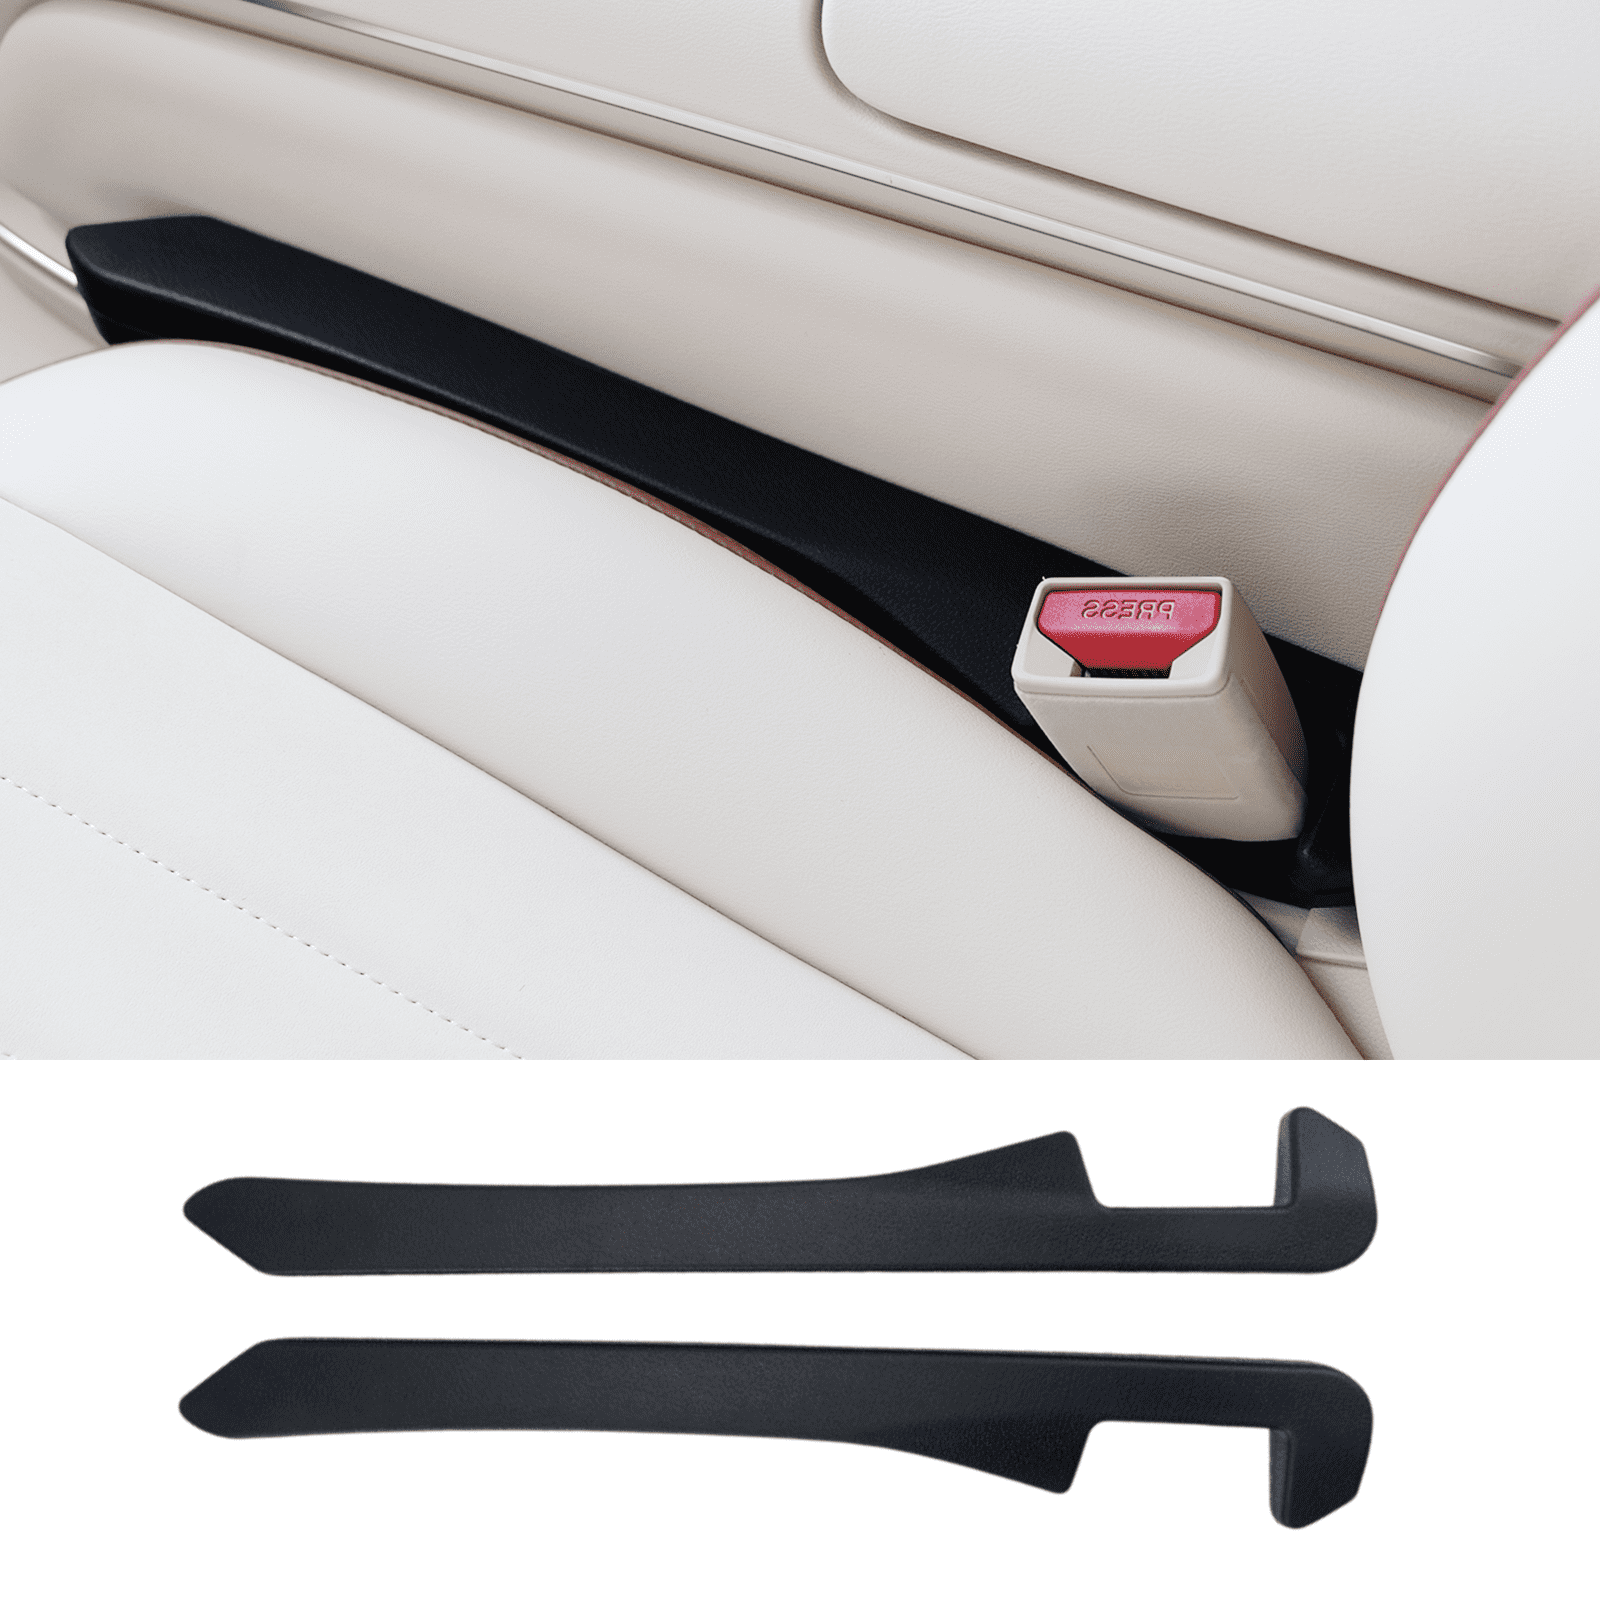 OhhGo Leather Car Seat Gap Filler, Universal SUV Truck to Fill the Gap  Between Seat and Console Black Crevice Crack Plug Drop Blocker, 2 Pack 